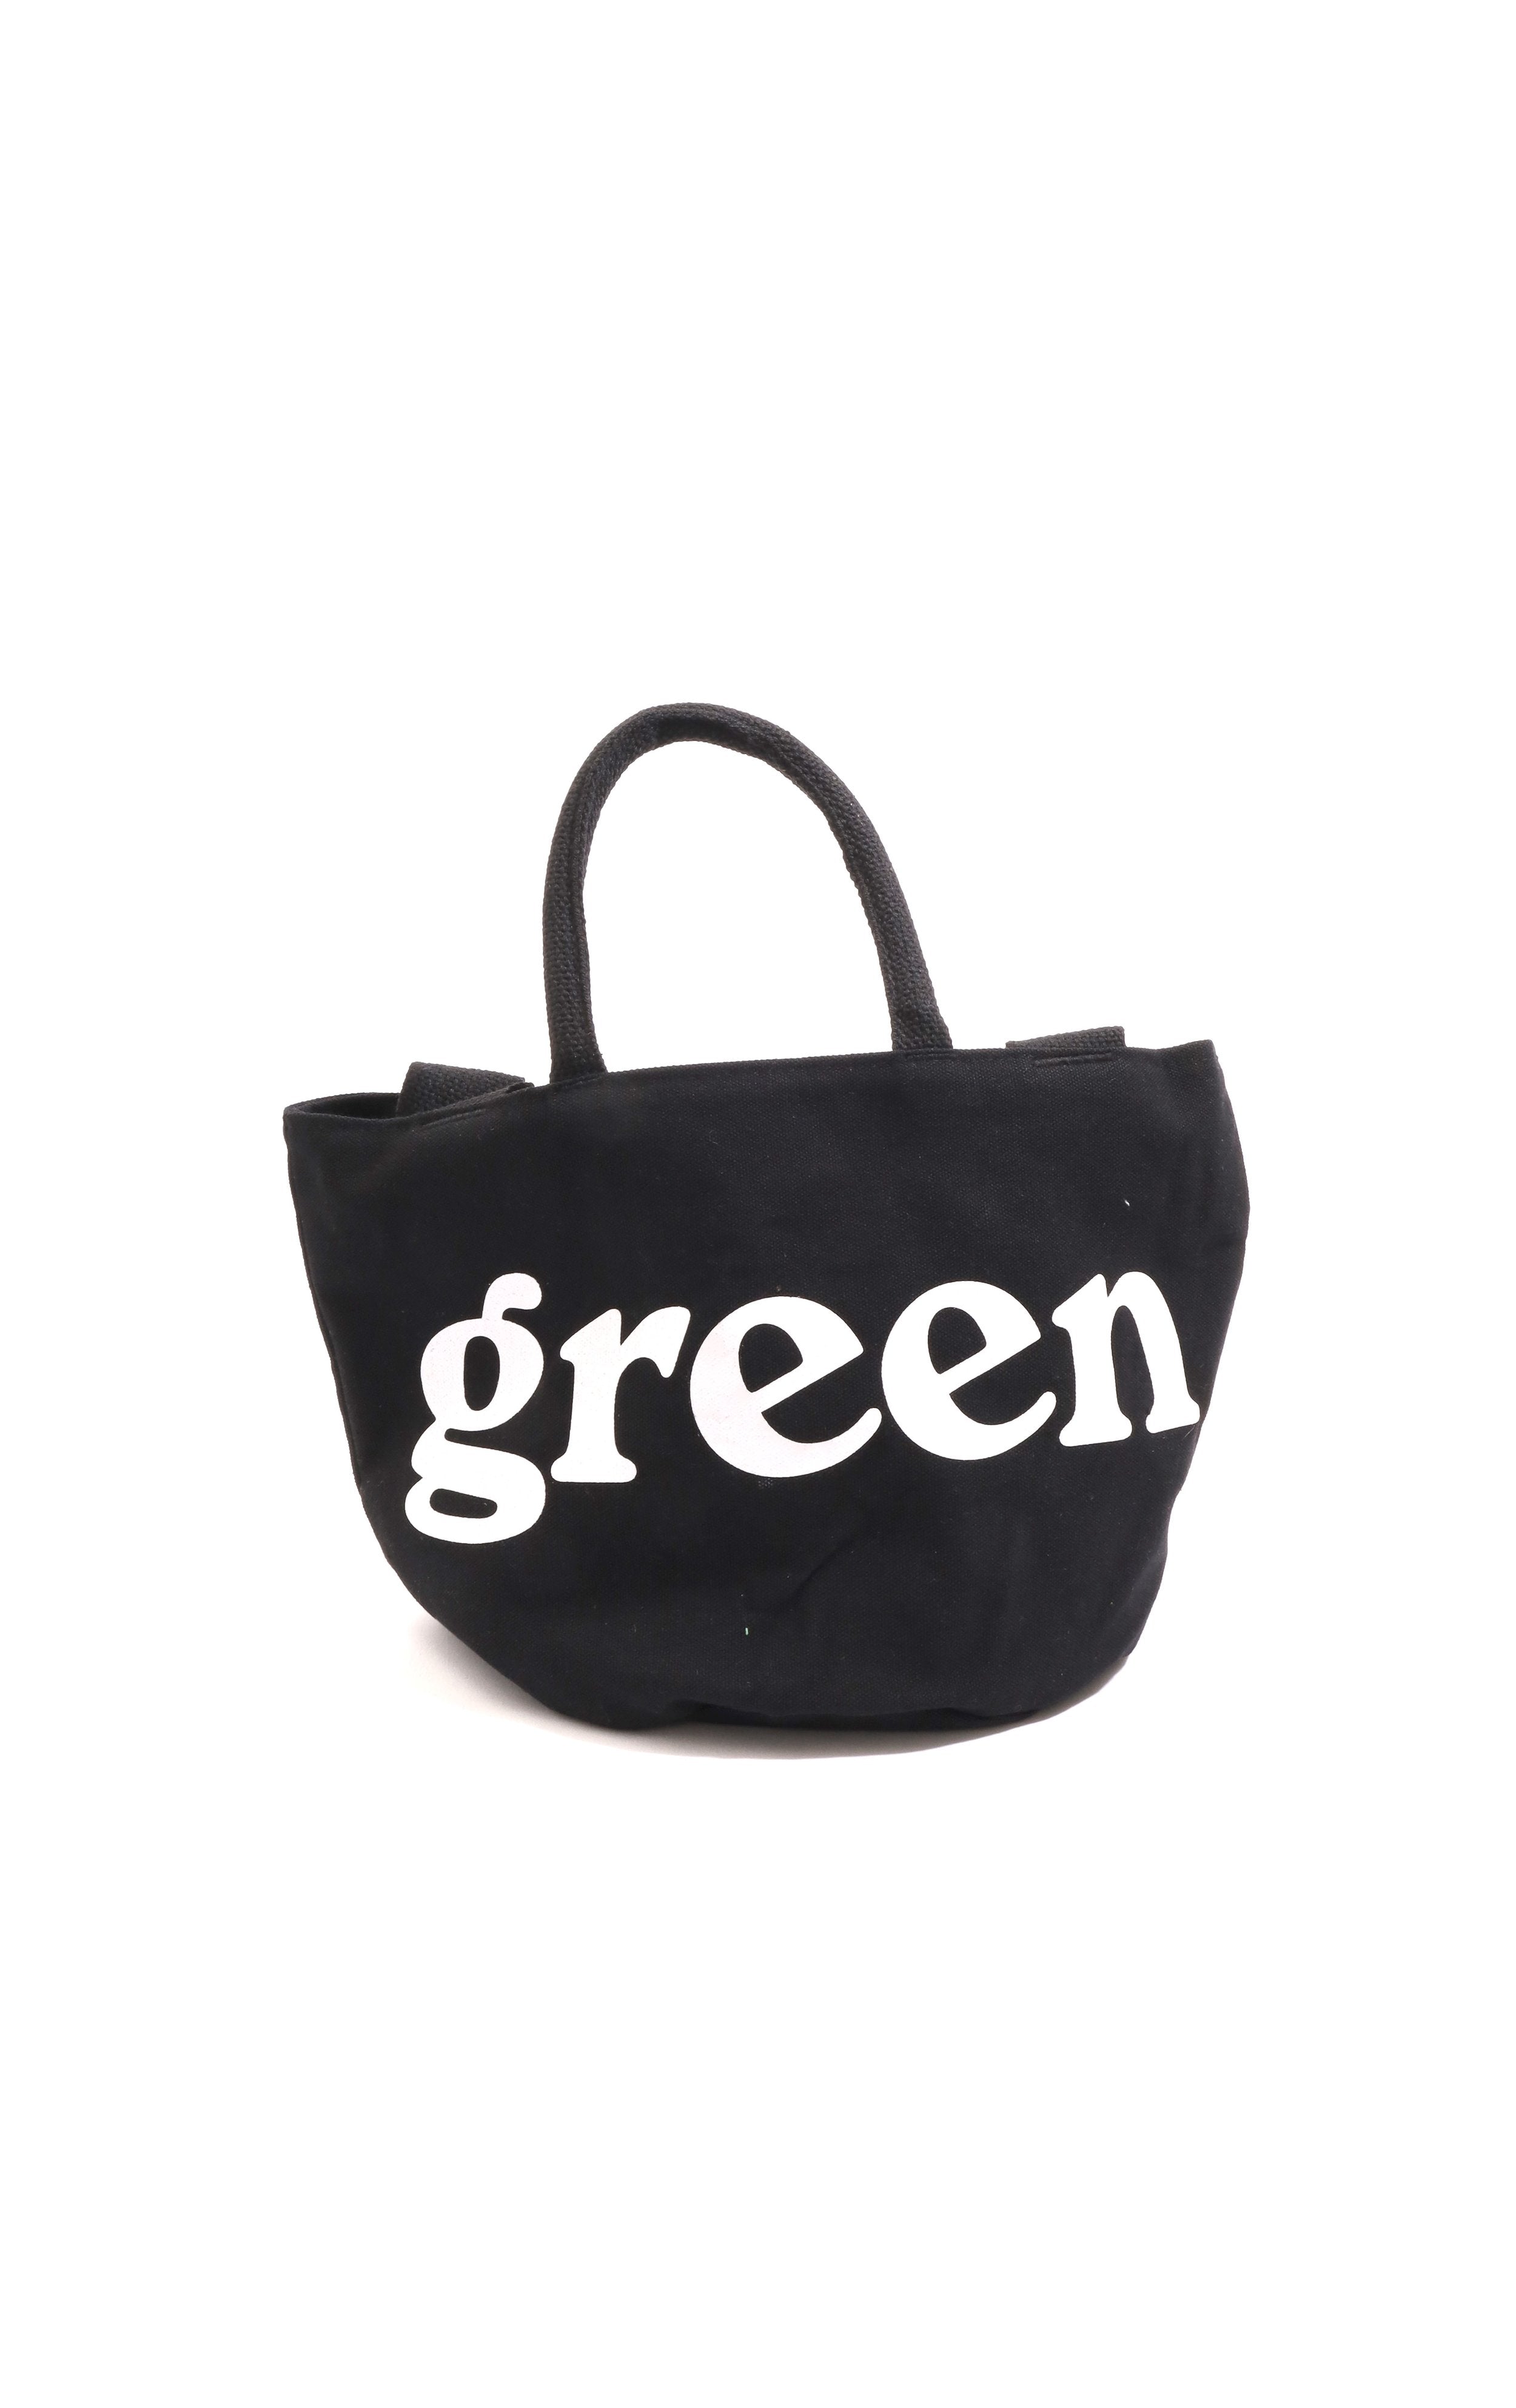 Small Round Tote / Grow Bag - Black-Mister Green-Mister Green